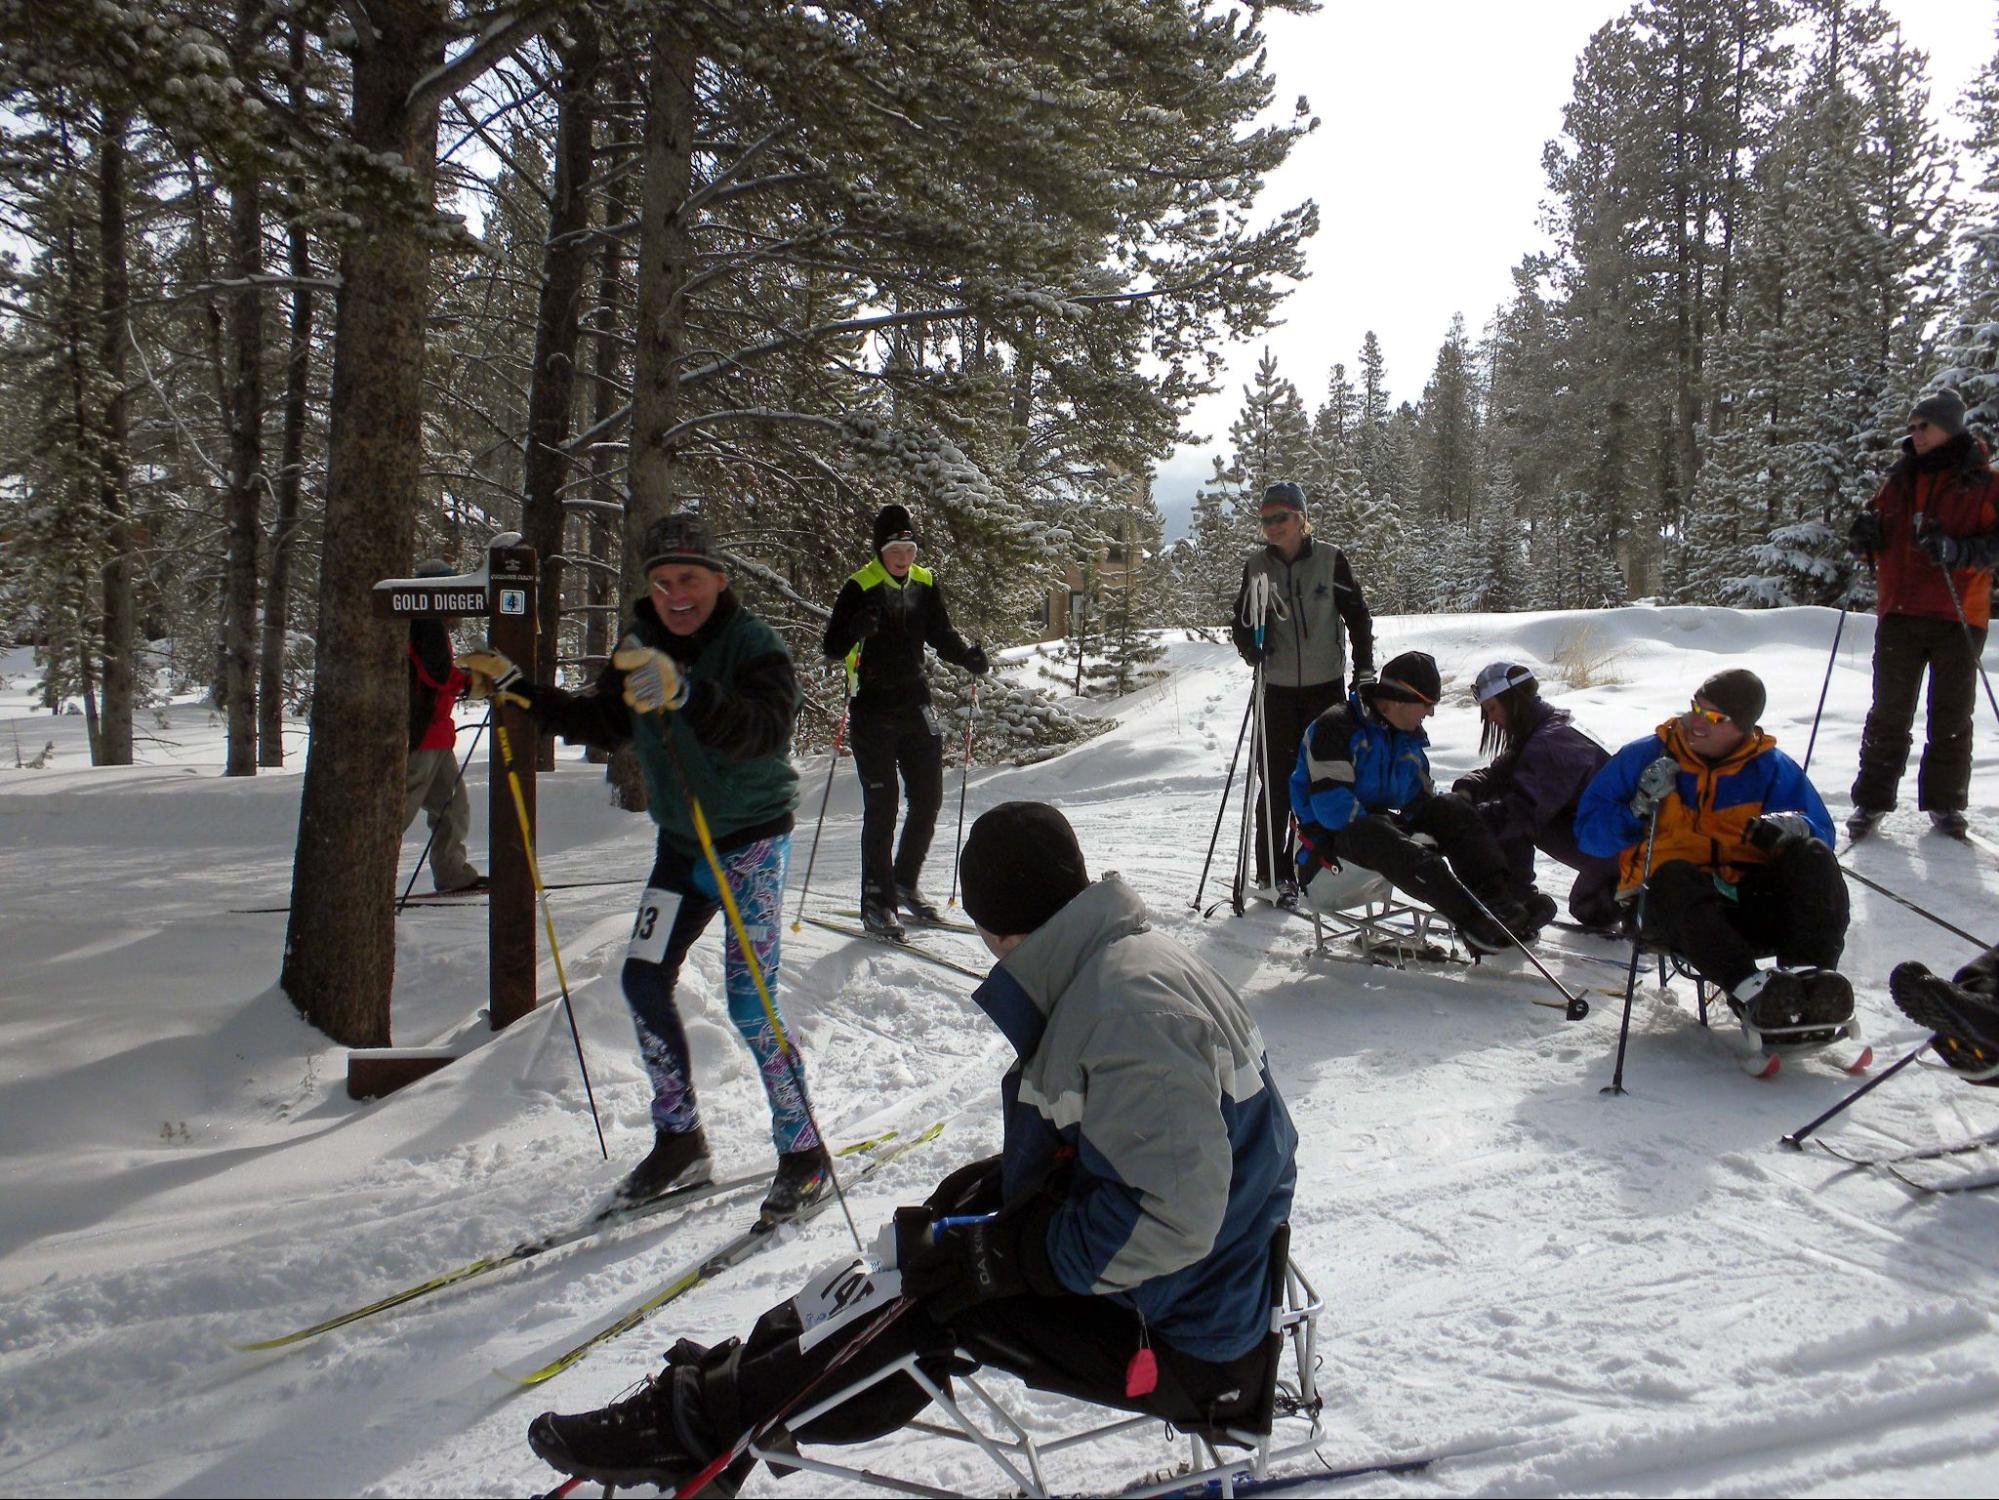 Gene at the Breckebeiner with para-Nordic racers.